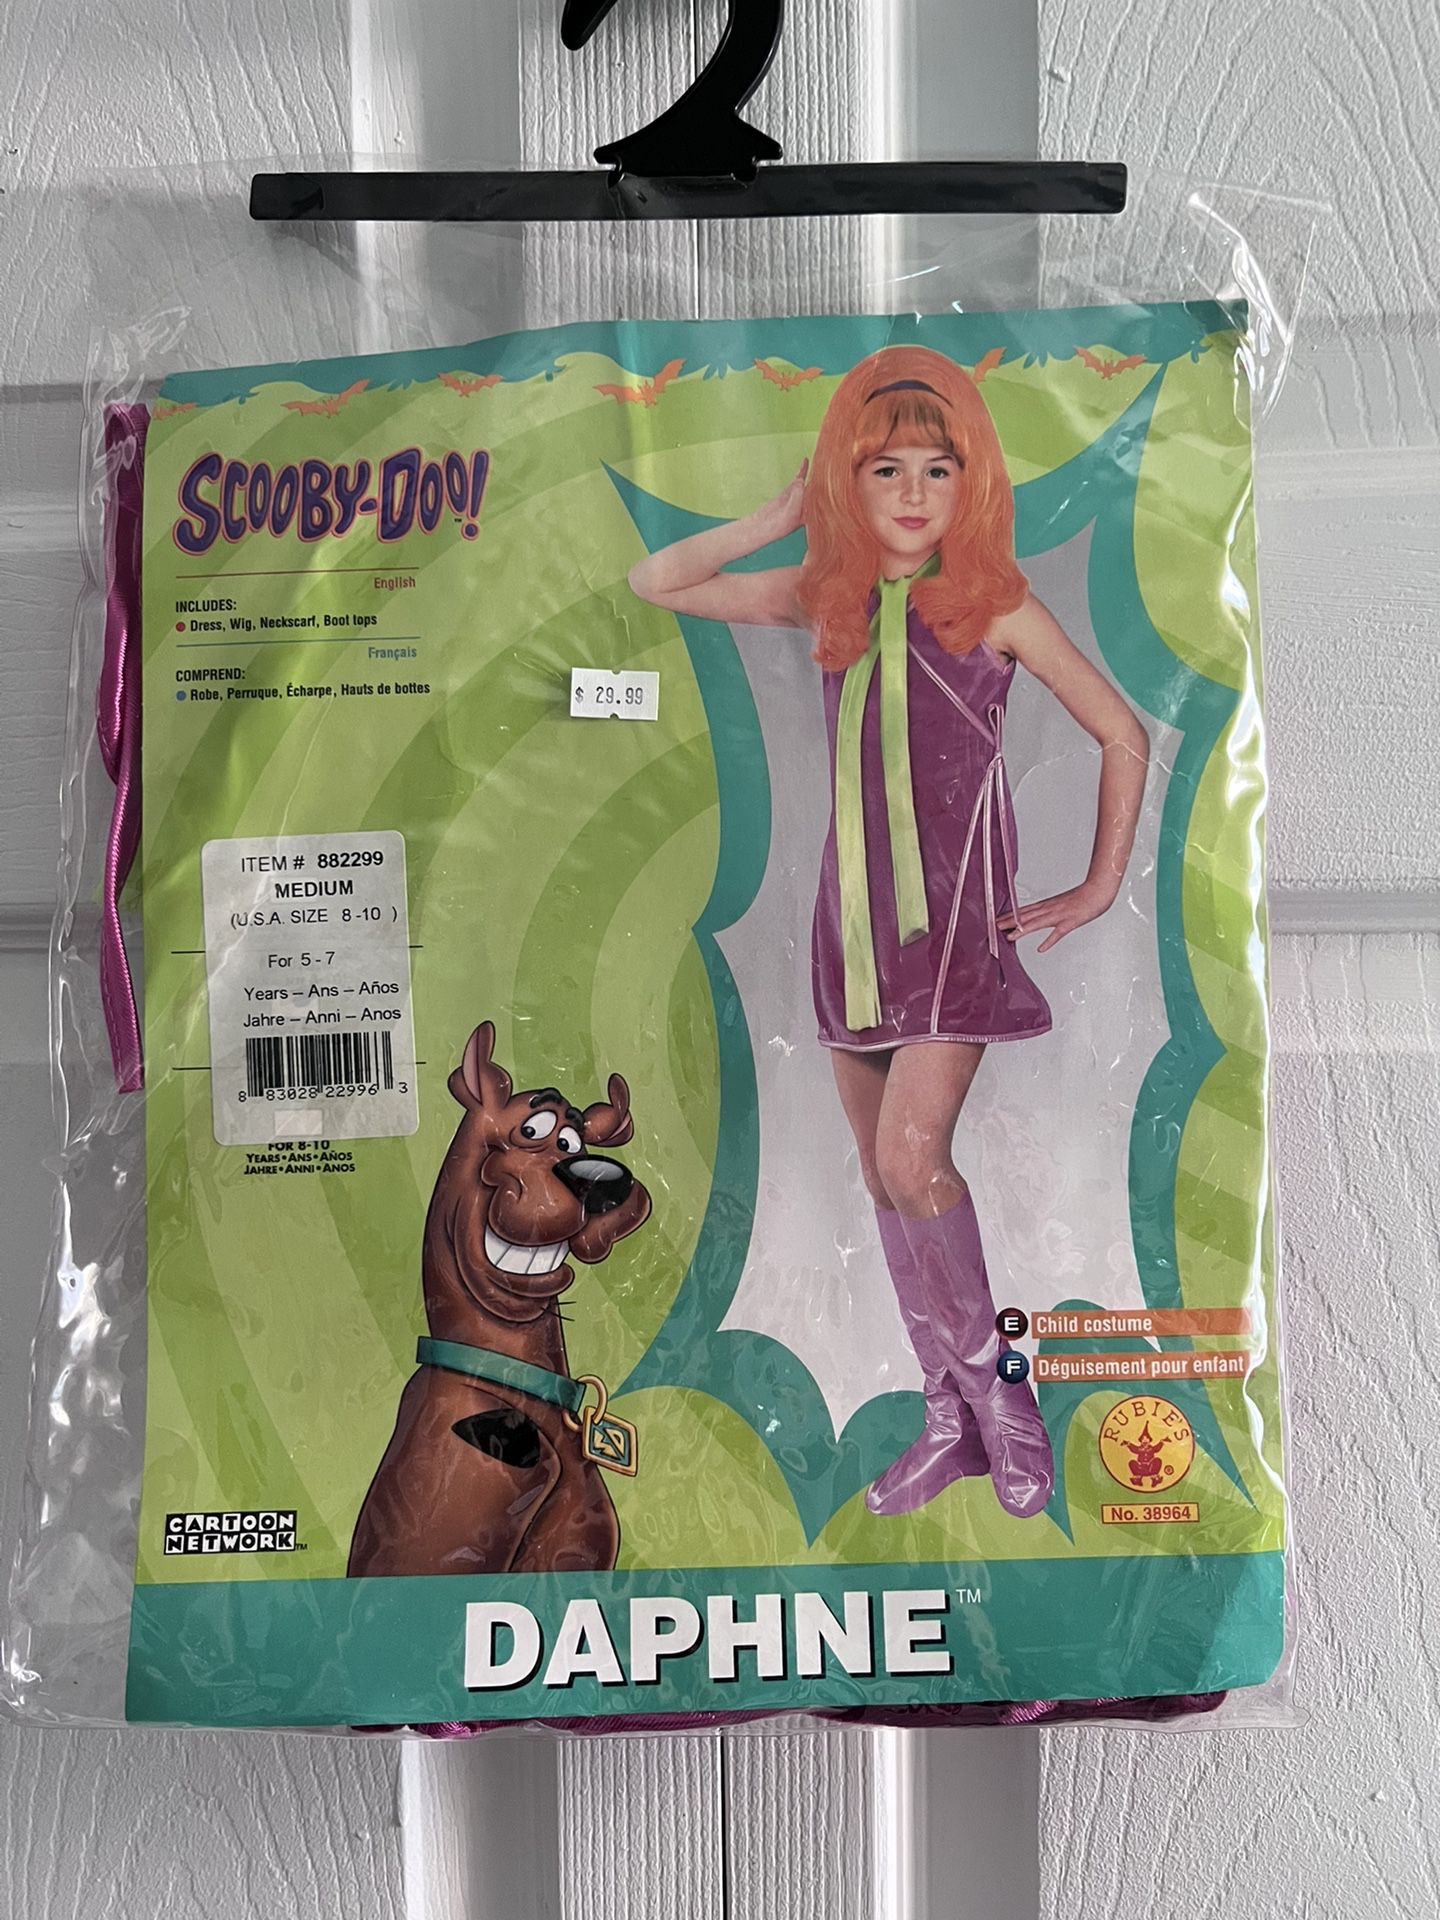 Daphne -Scooby-Doo Costume For 5-7 Yr Olds